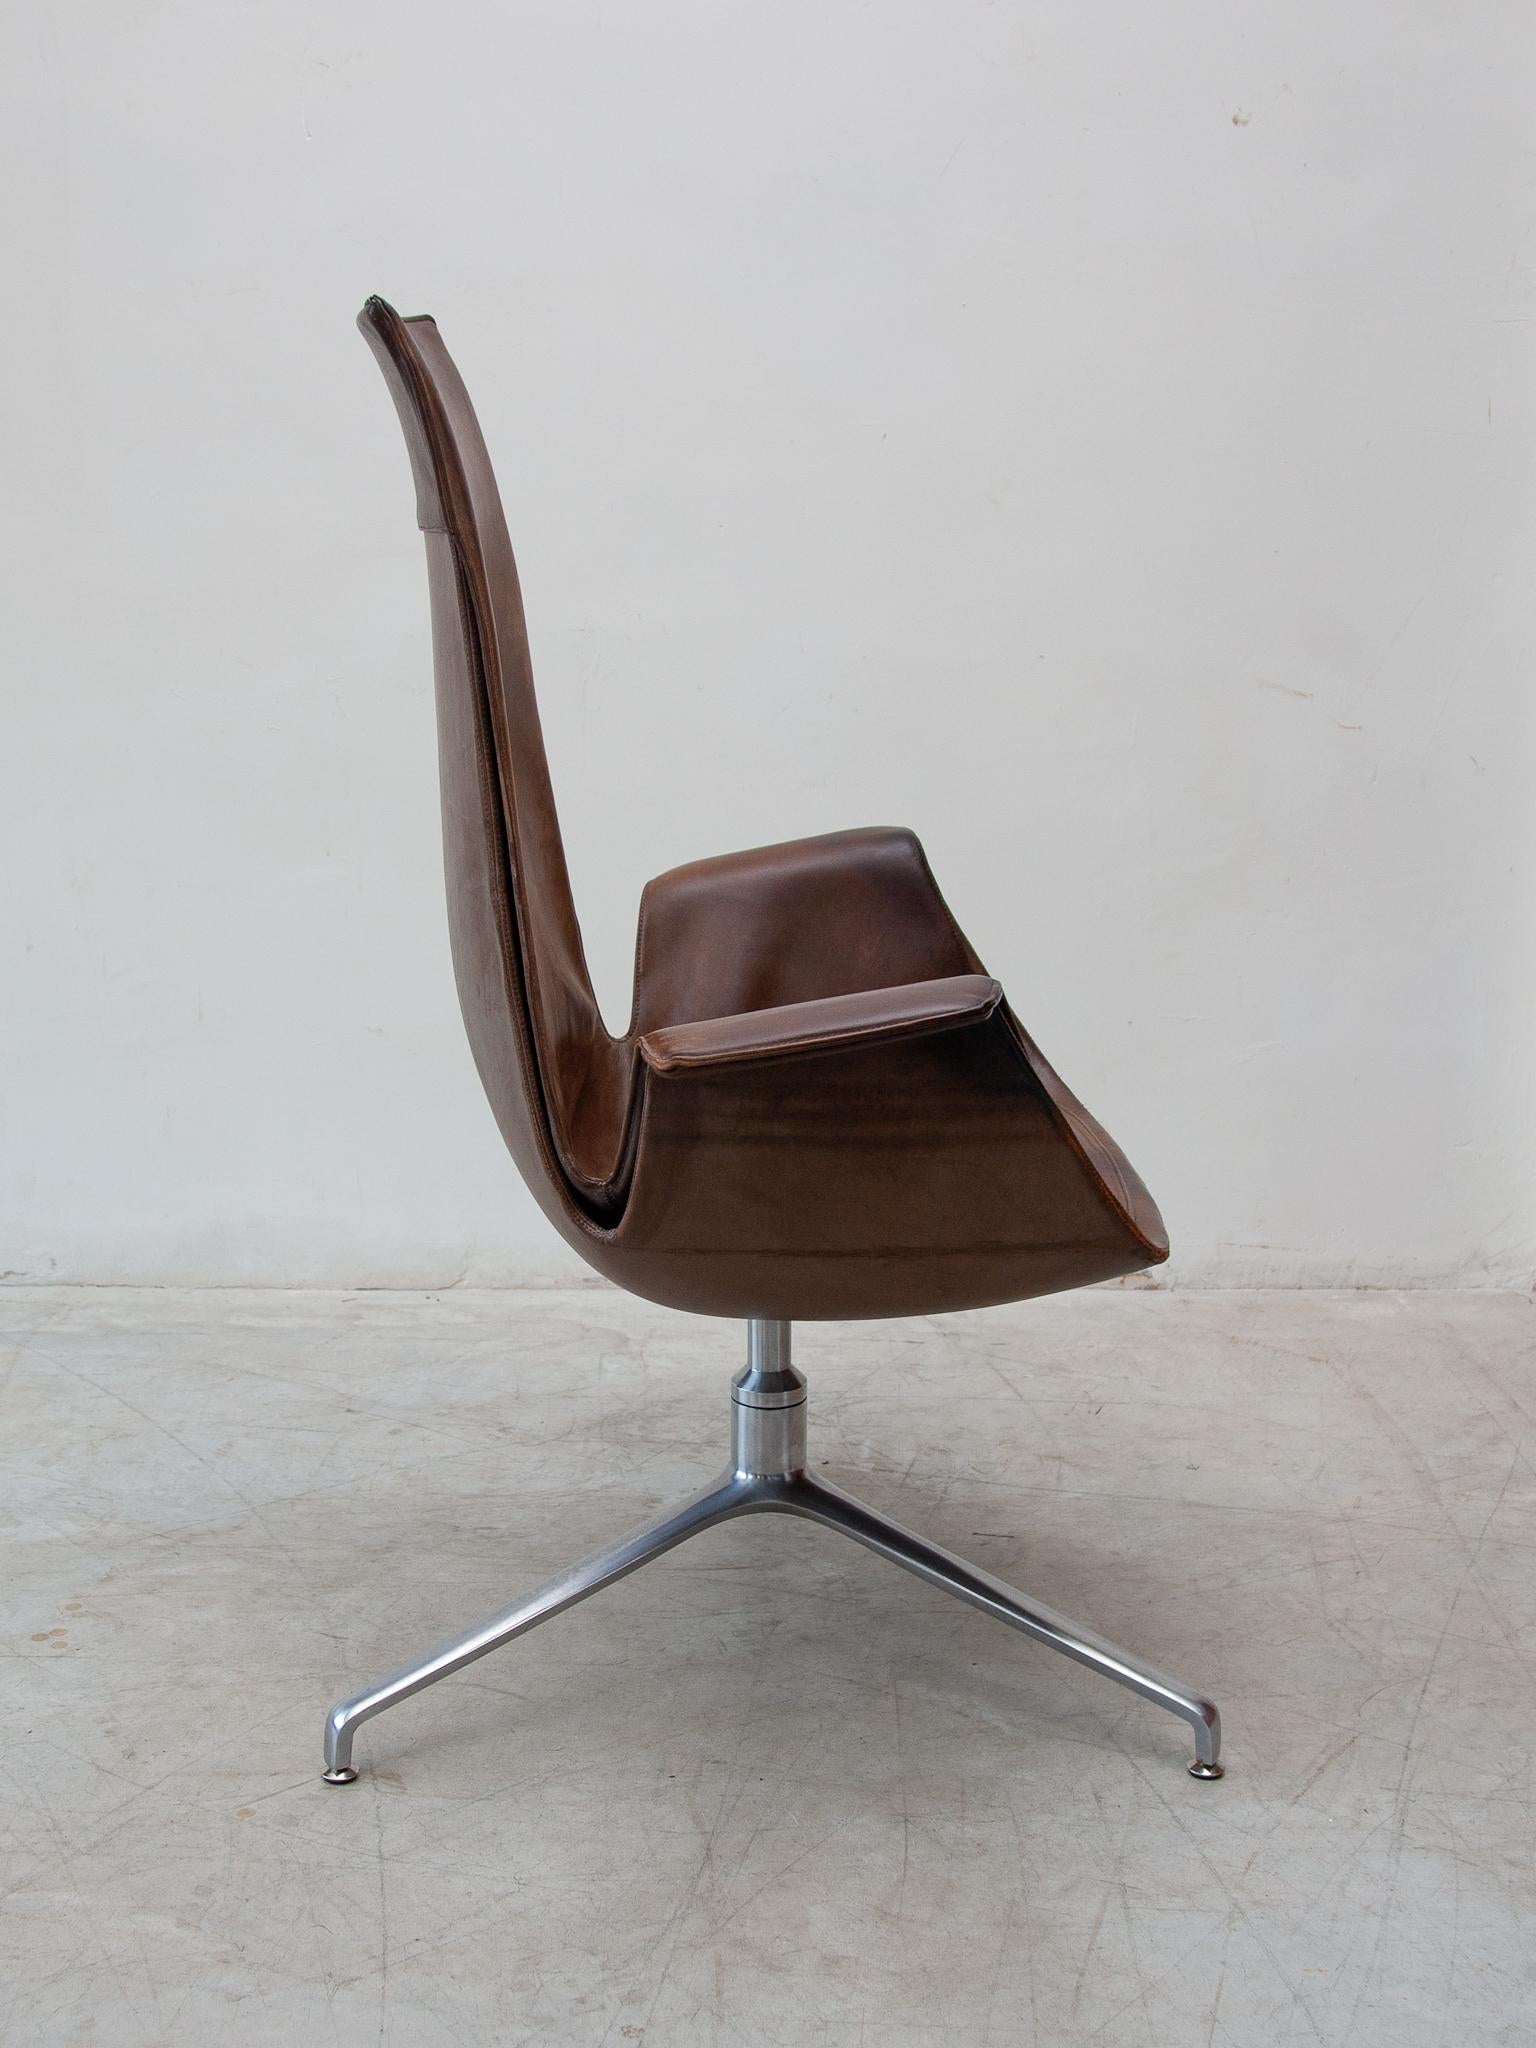 Fabricius & Kastholm FK6725 Desk, Lounge Chair in Brown Leather, Kill 6